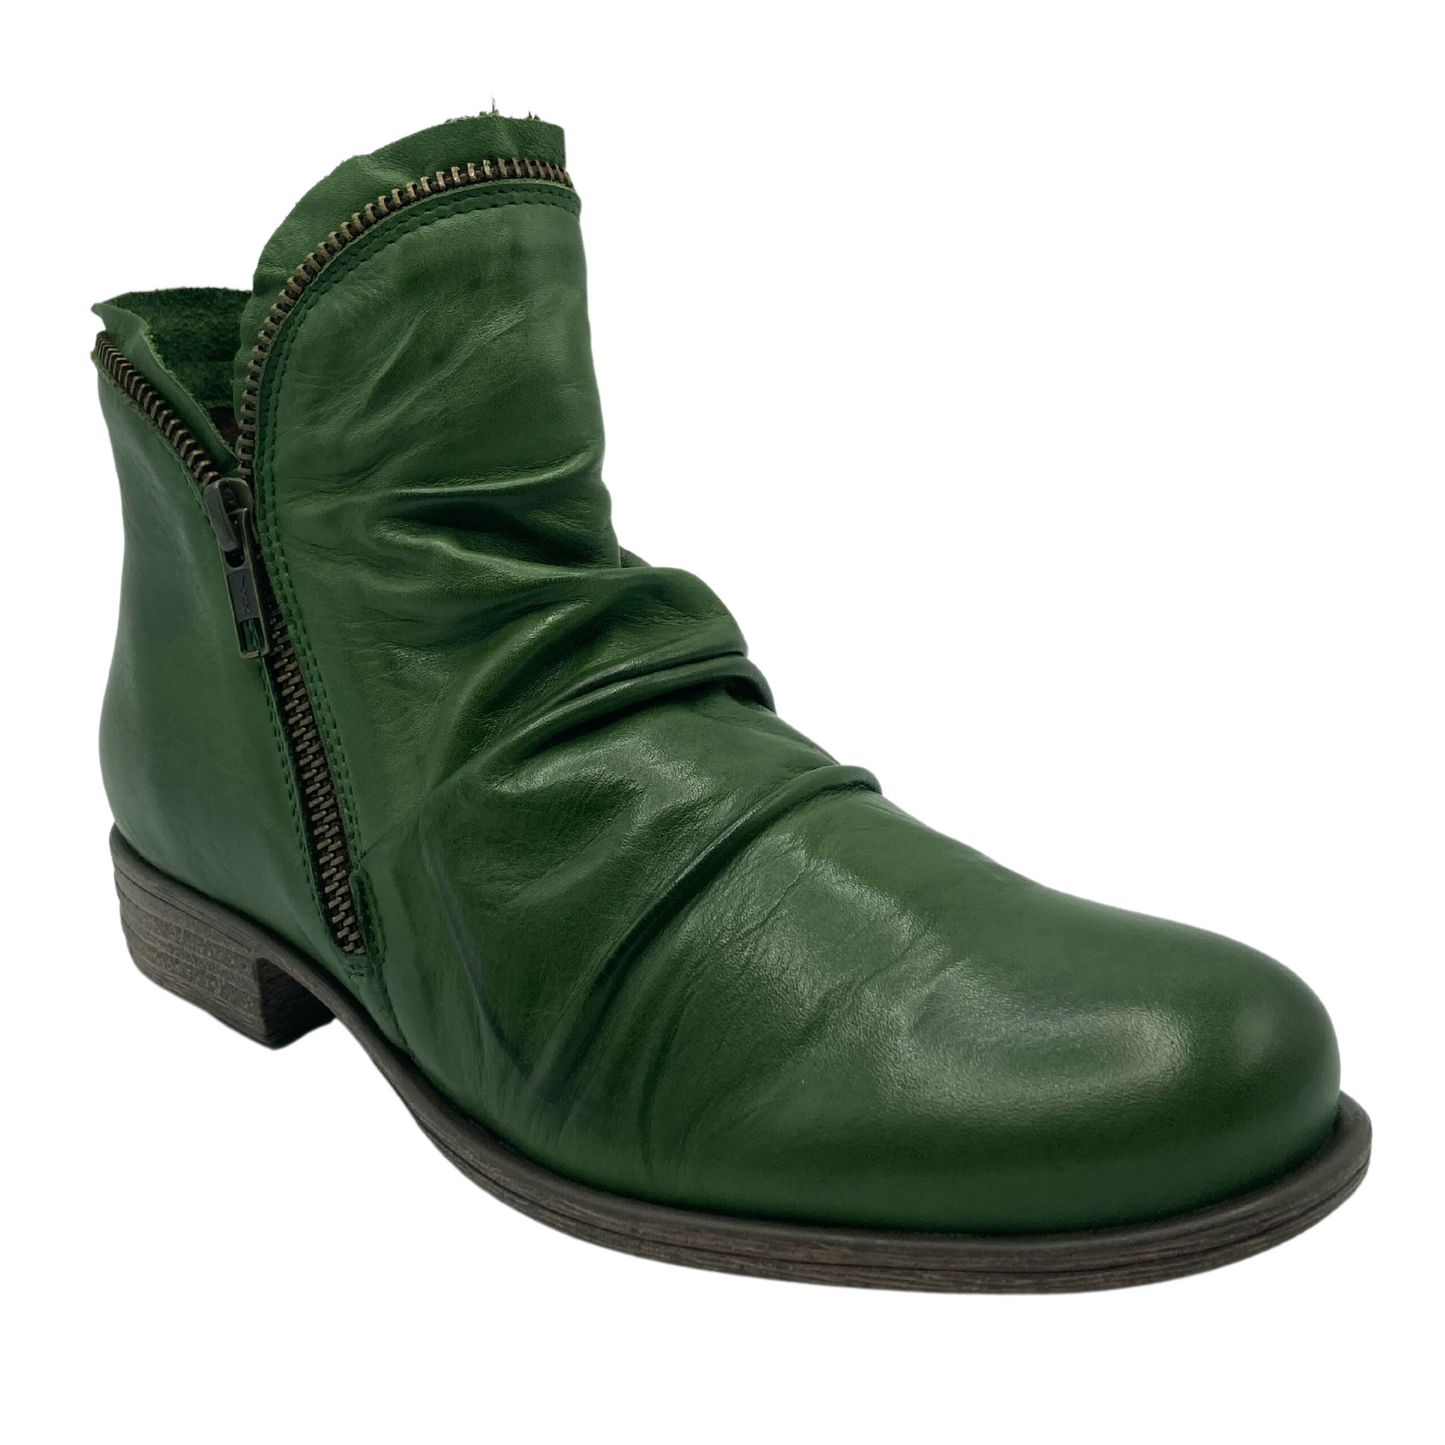 45 degree angled view of slouchy, green, leather boot with zipper detail